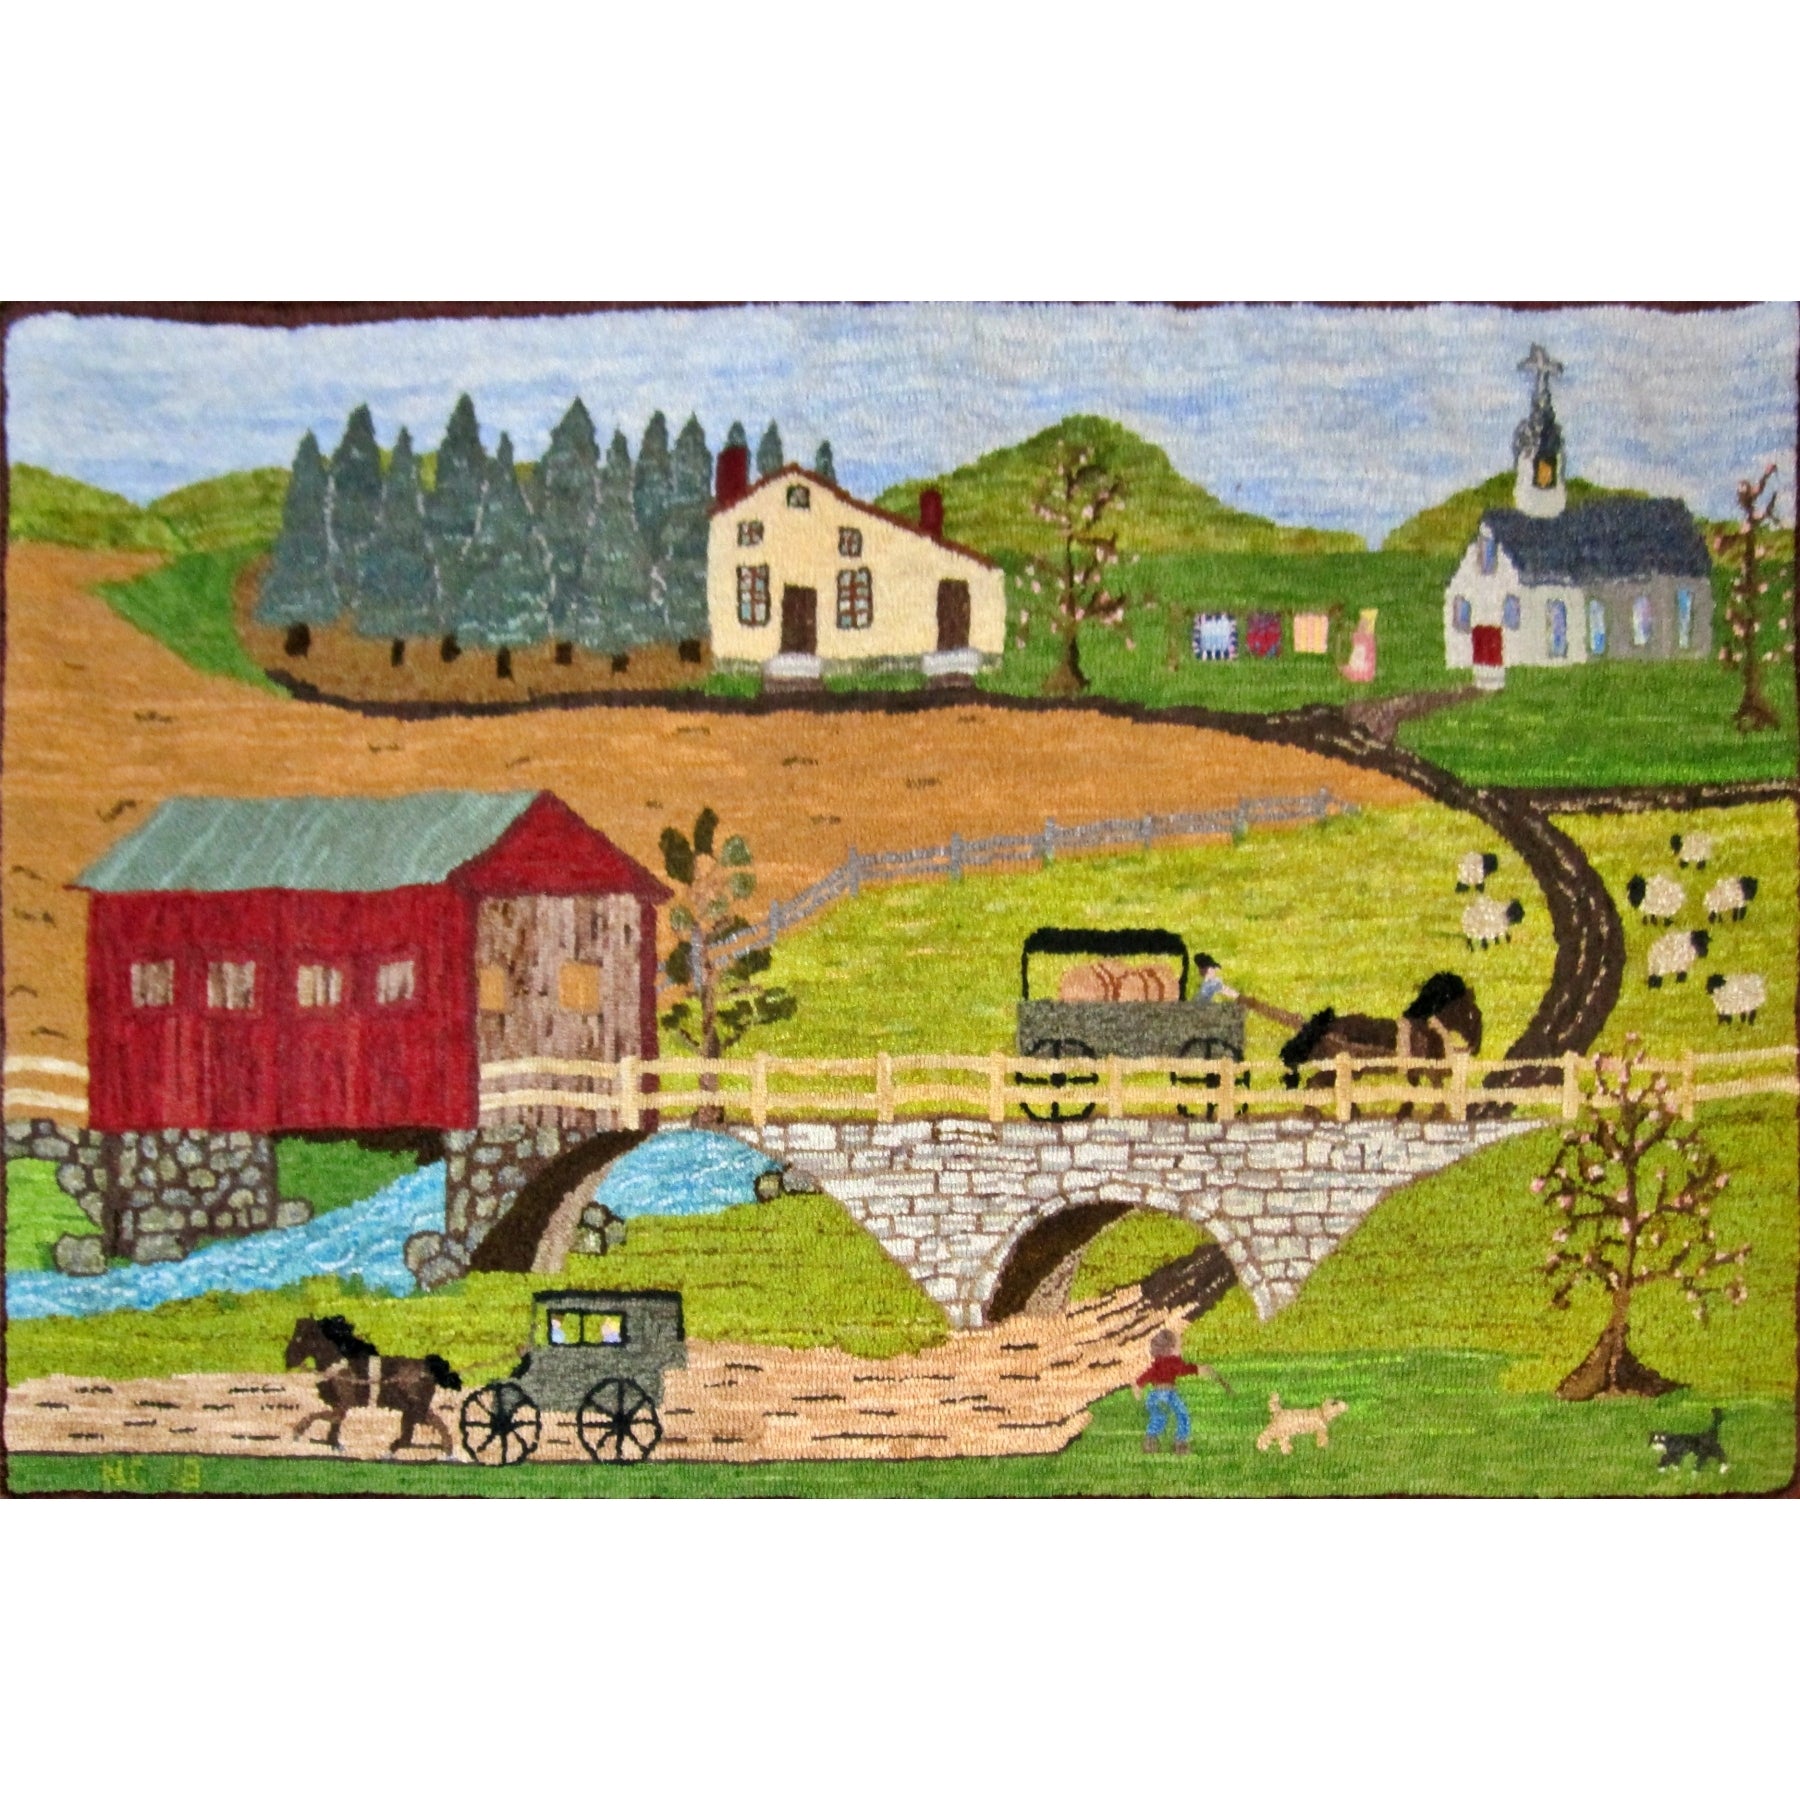 Yester-Year, rug hooked by Nancy Crouse